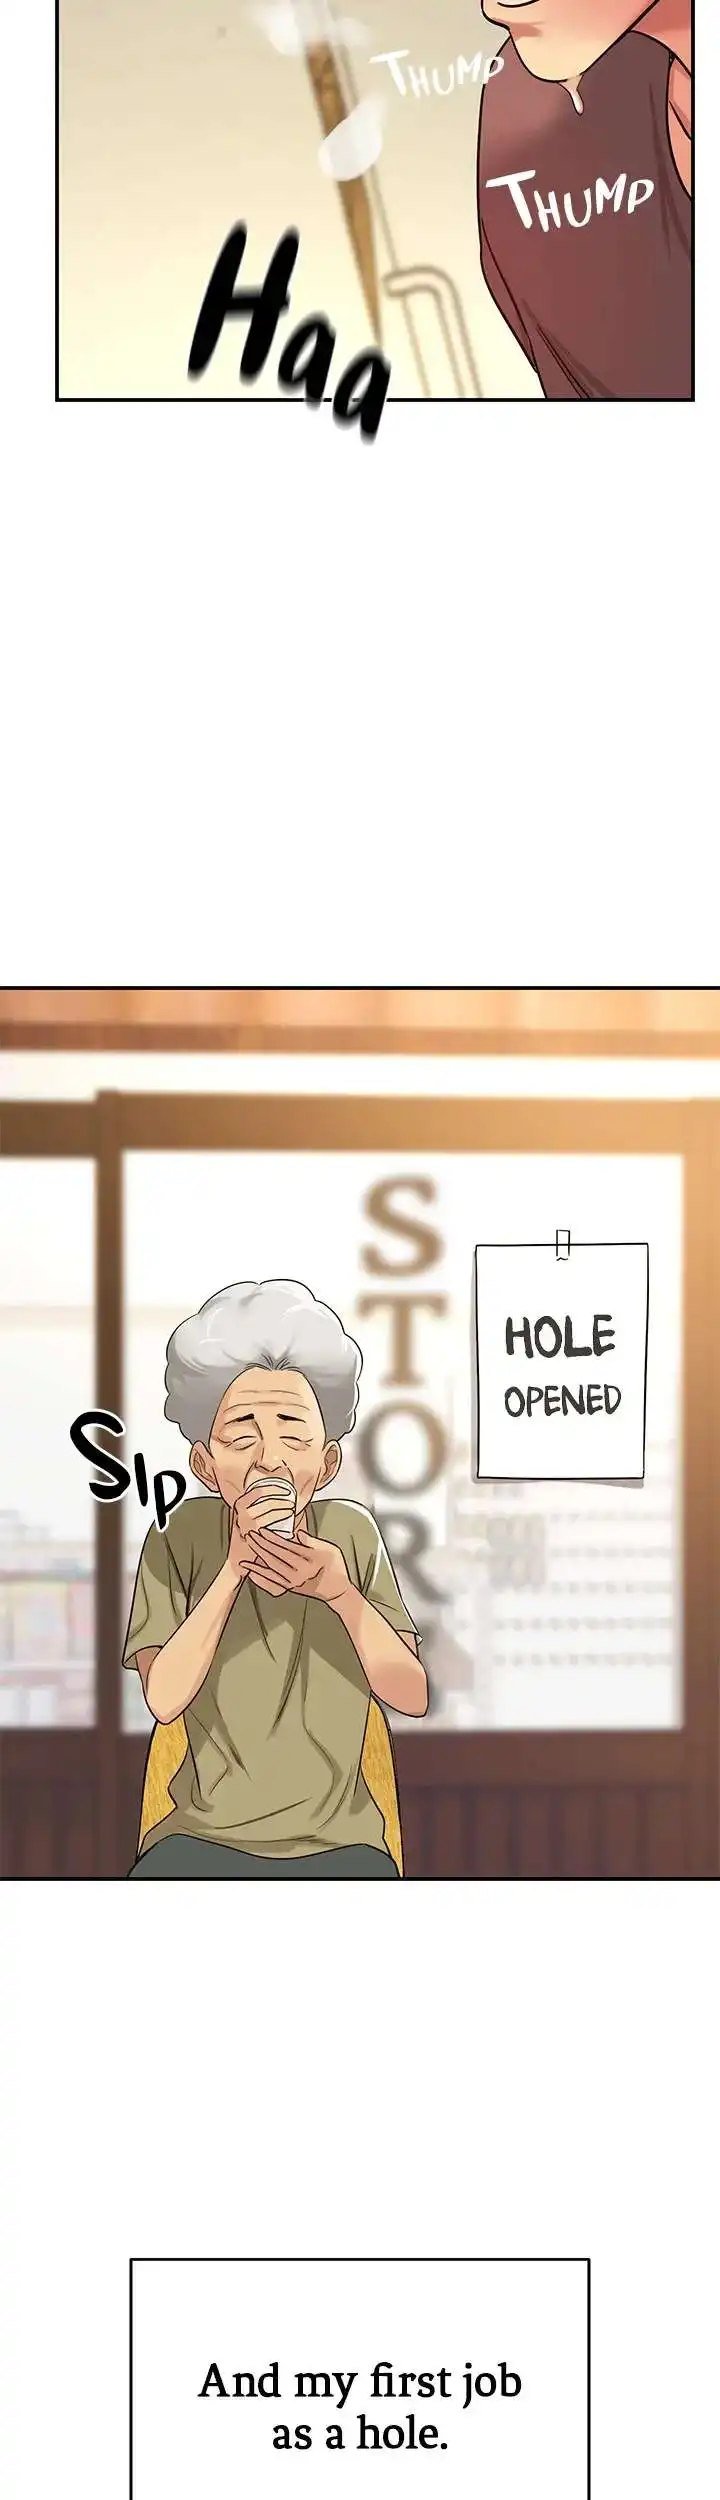 the-hole-is-open-chap-3-2